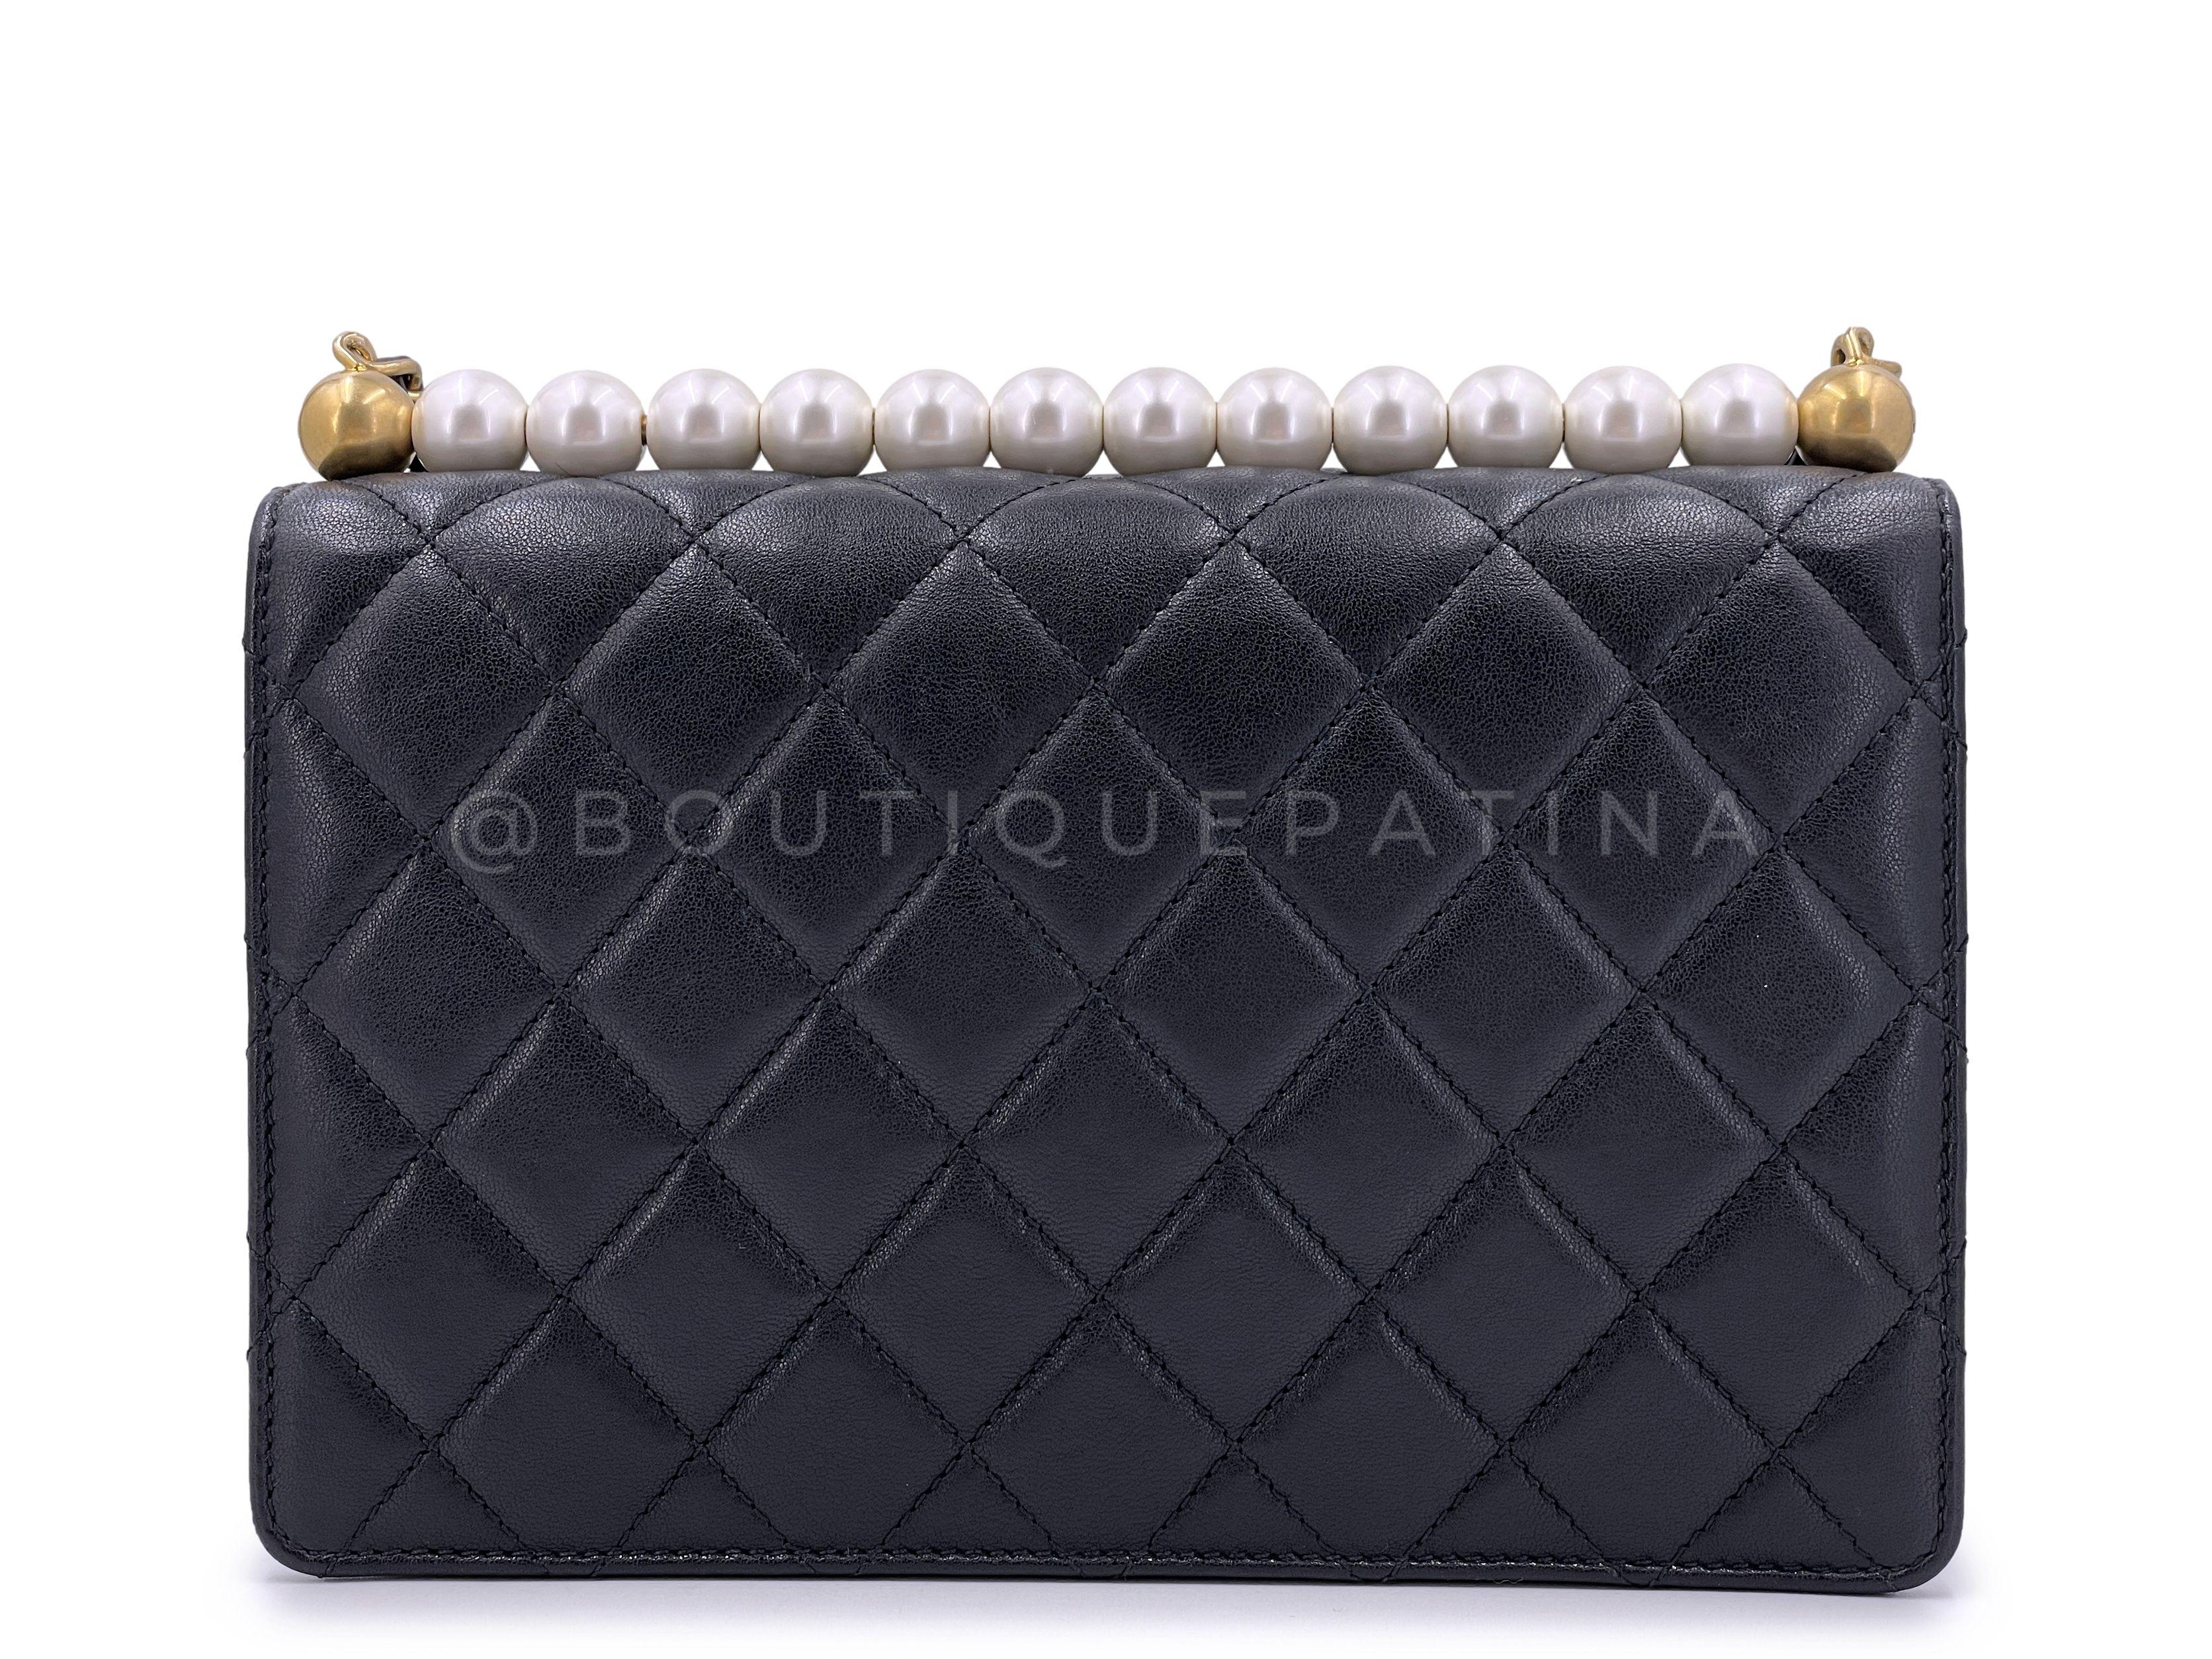 Women's Pristine 19S Chanel Chic Pearls Quilted Flap Bag Black GHW 66675 For Sale